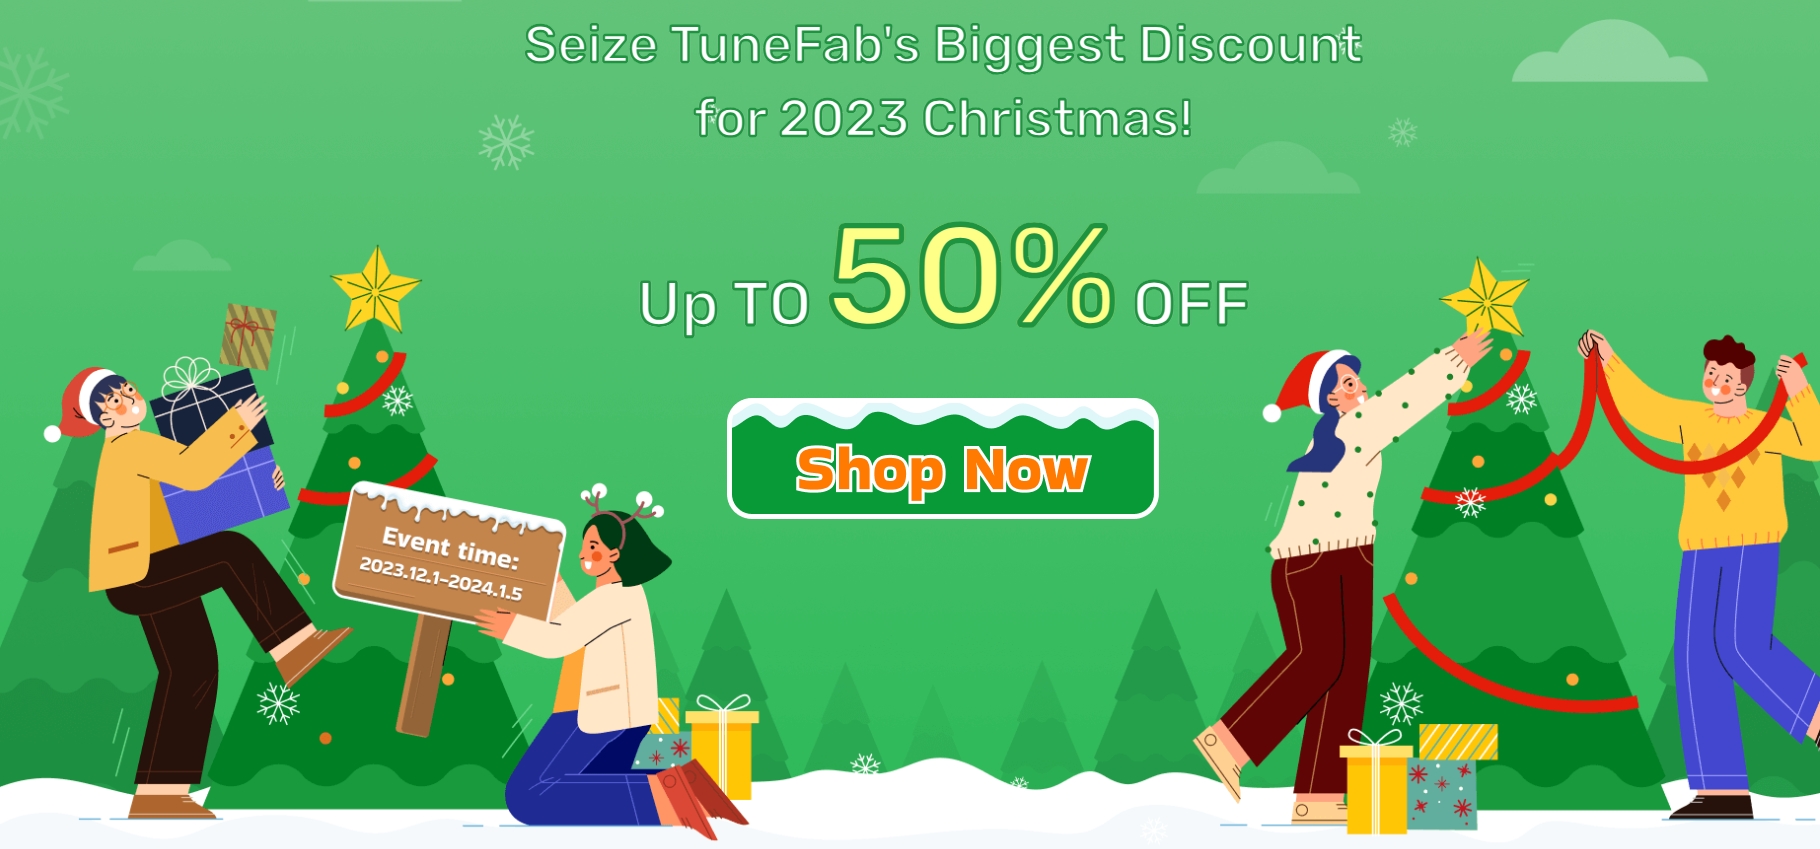 TuneFab Announces Spectacular Christmas Event – Up to 50% OFF!